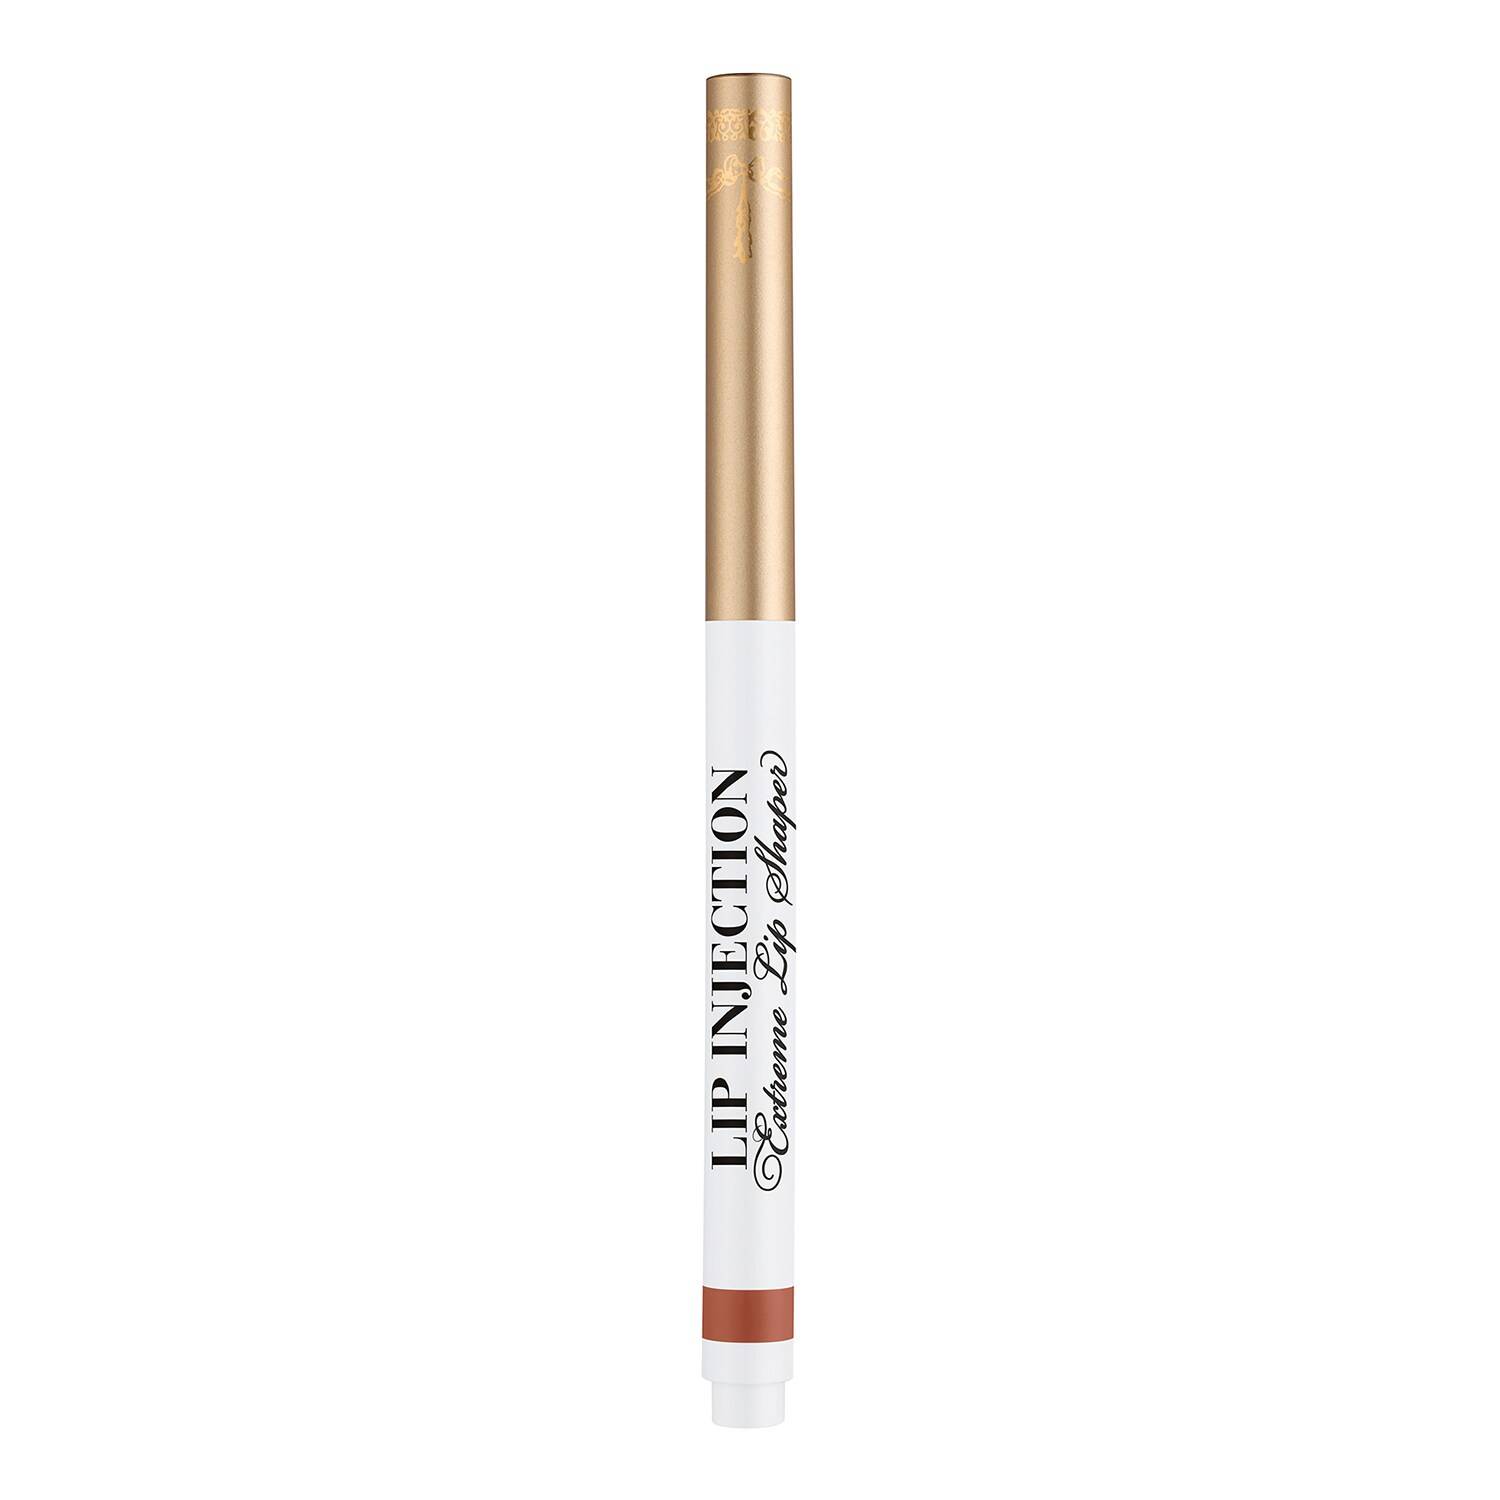 Too Faced Lip Injection Extreme Lip Shaper 0.38G Cinnamon Swell (0.28G)